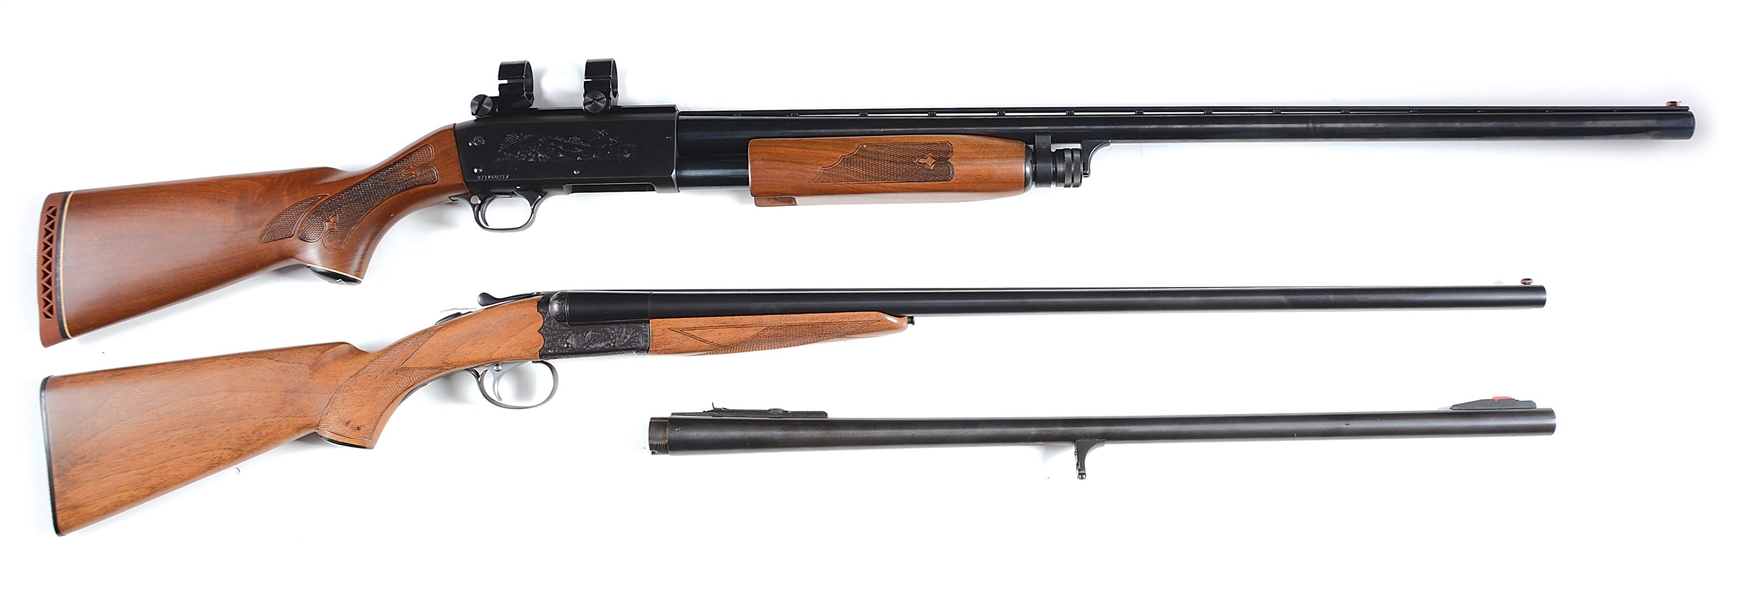 (M) LOT OF 2: (A) ITHACA 37 PUMP ACTION SHOTGUN AND (B) ITHACA 100 SIDE BY SIDE SHOTGUN.